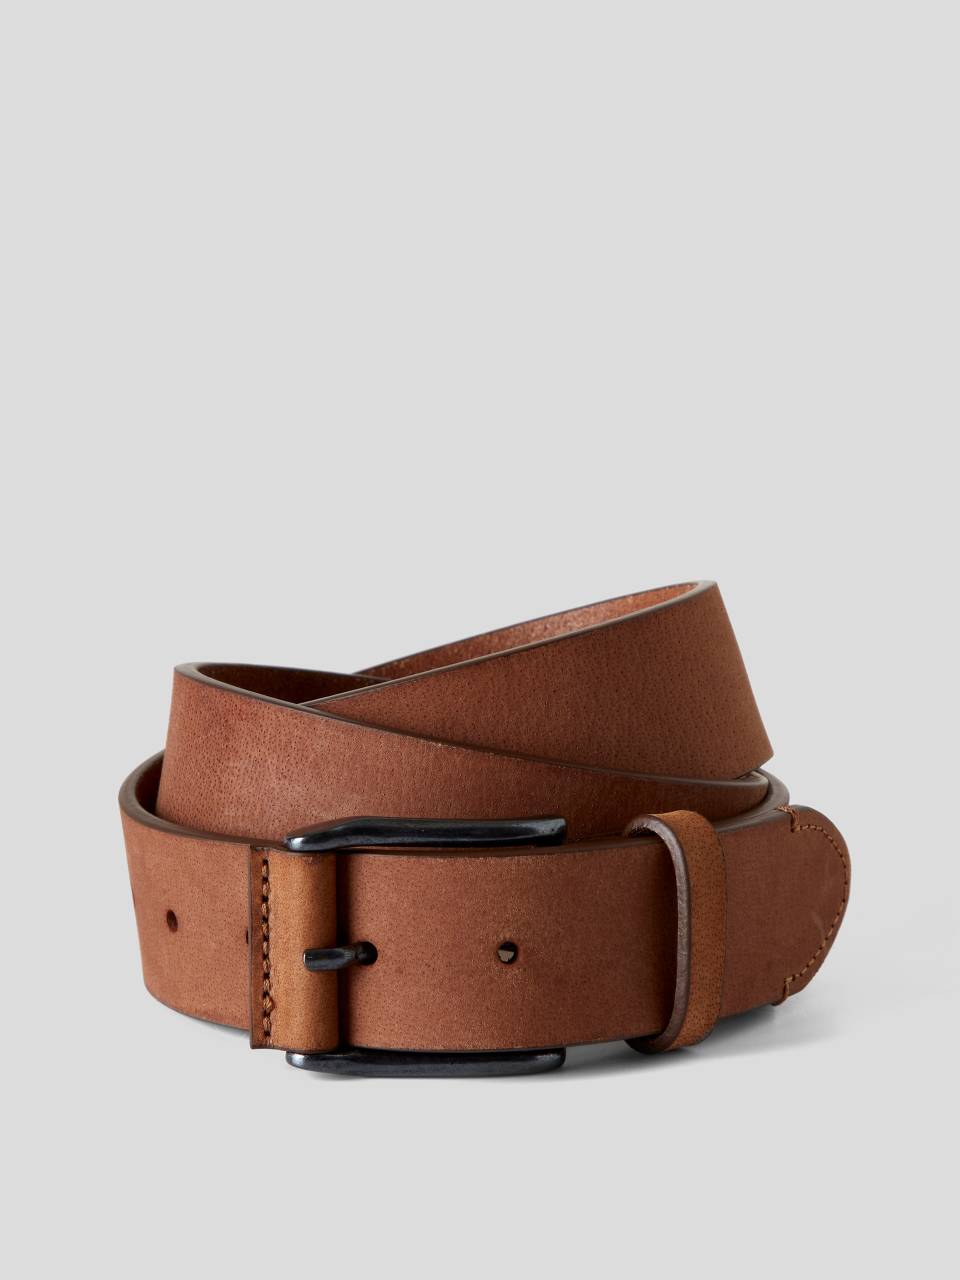 Leather belt Brighton Brown size S International in Leather - 34308707